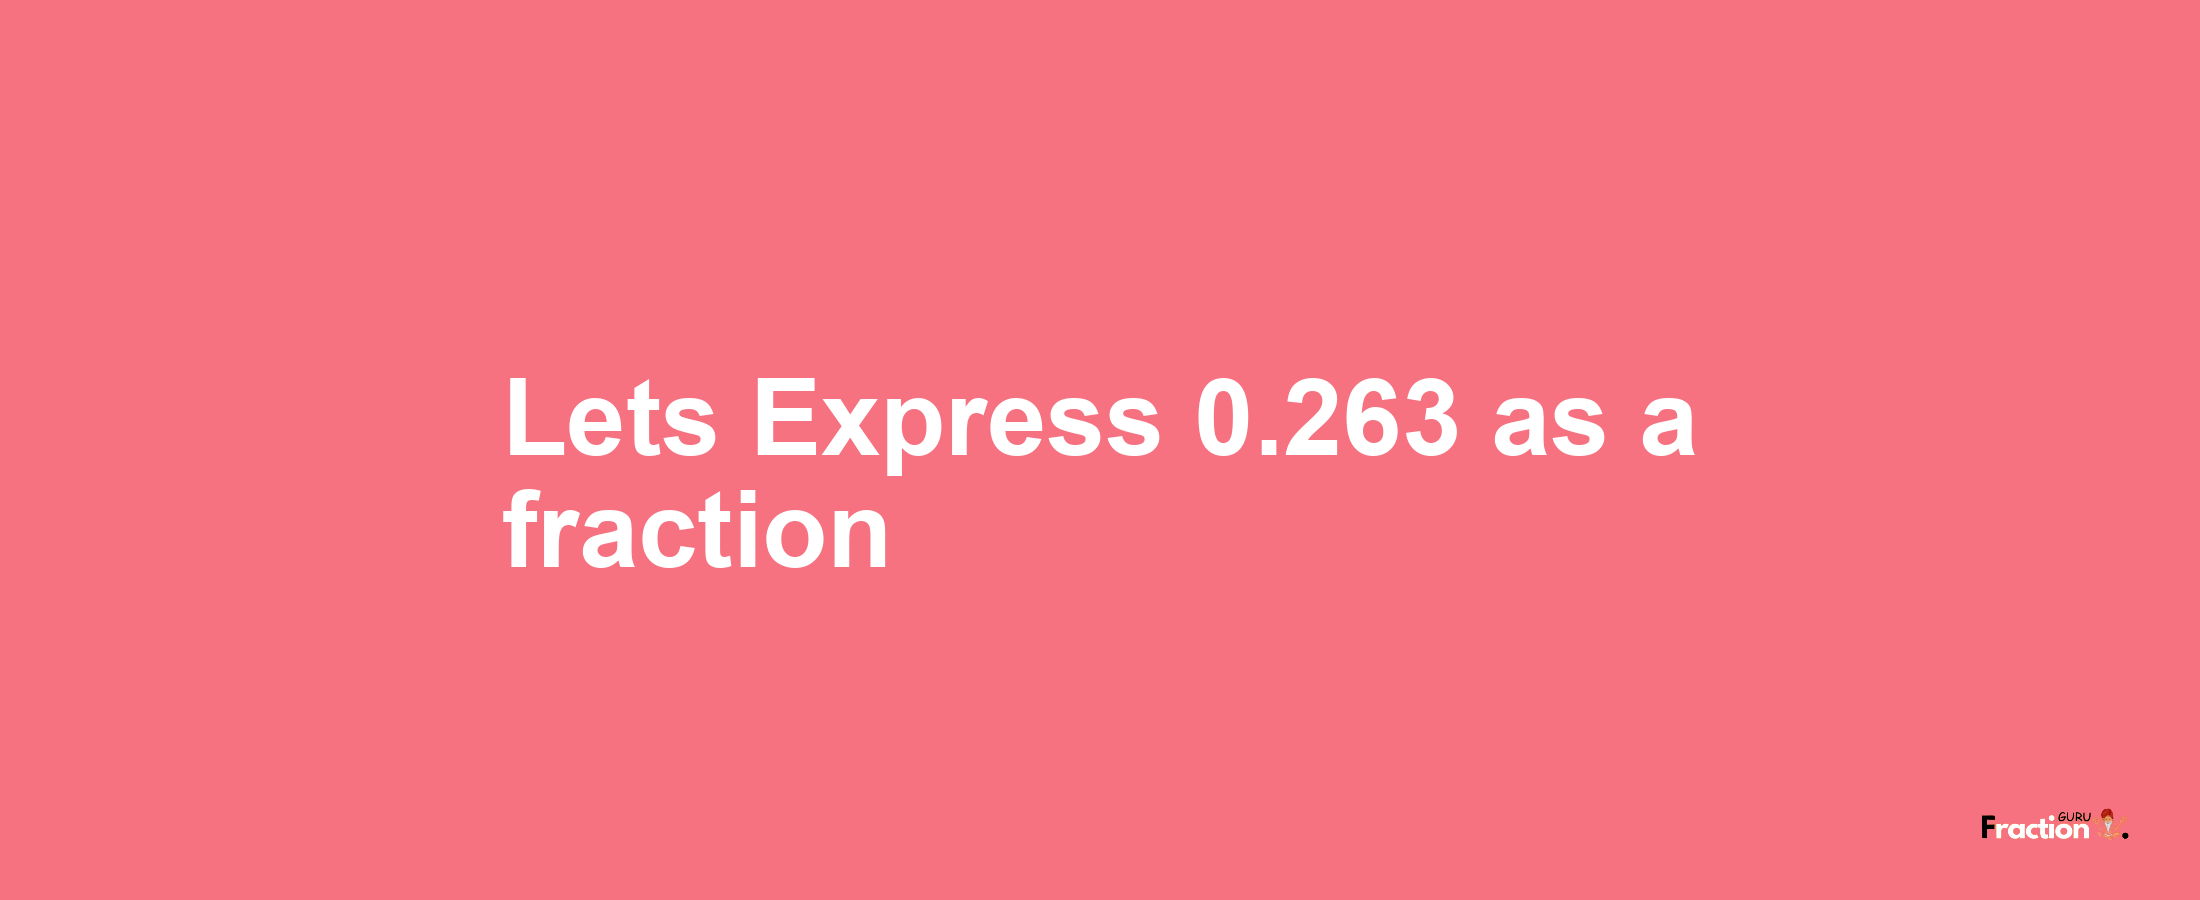 Lets Express 0.263 as afraction